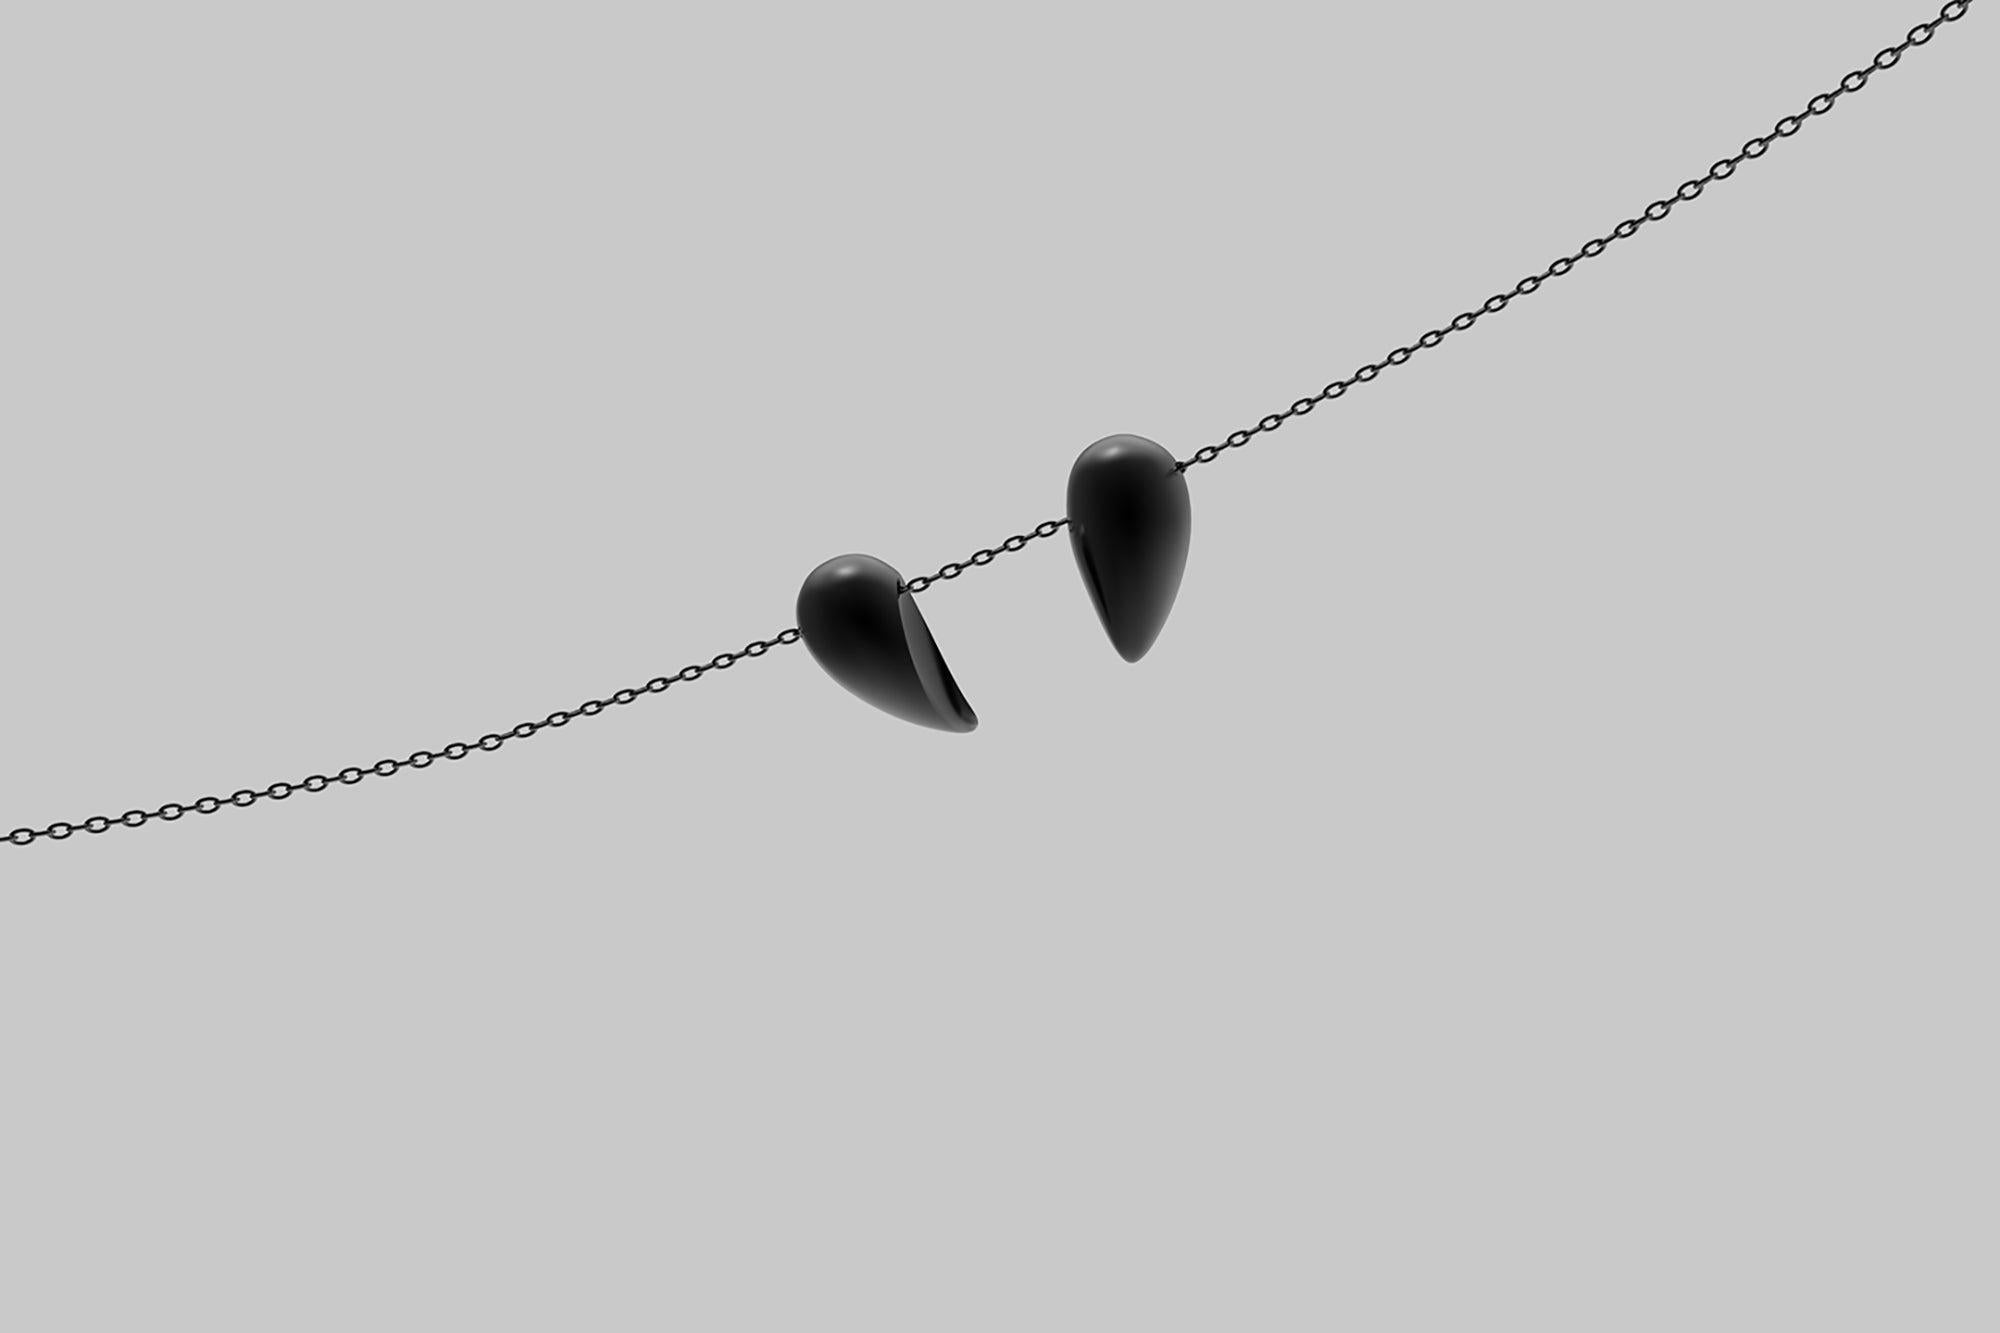 Jacqueline Rabun 
'Black Love' Large Pendant
Oxidised Sterling Silver

Two seeds symbolising transformation and change come together to delicately form a sculptural heart symbol, a talisman illustrating the beauty, elegance and grace of the heart of